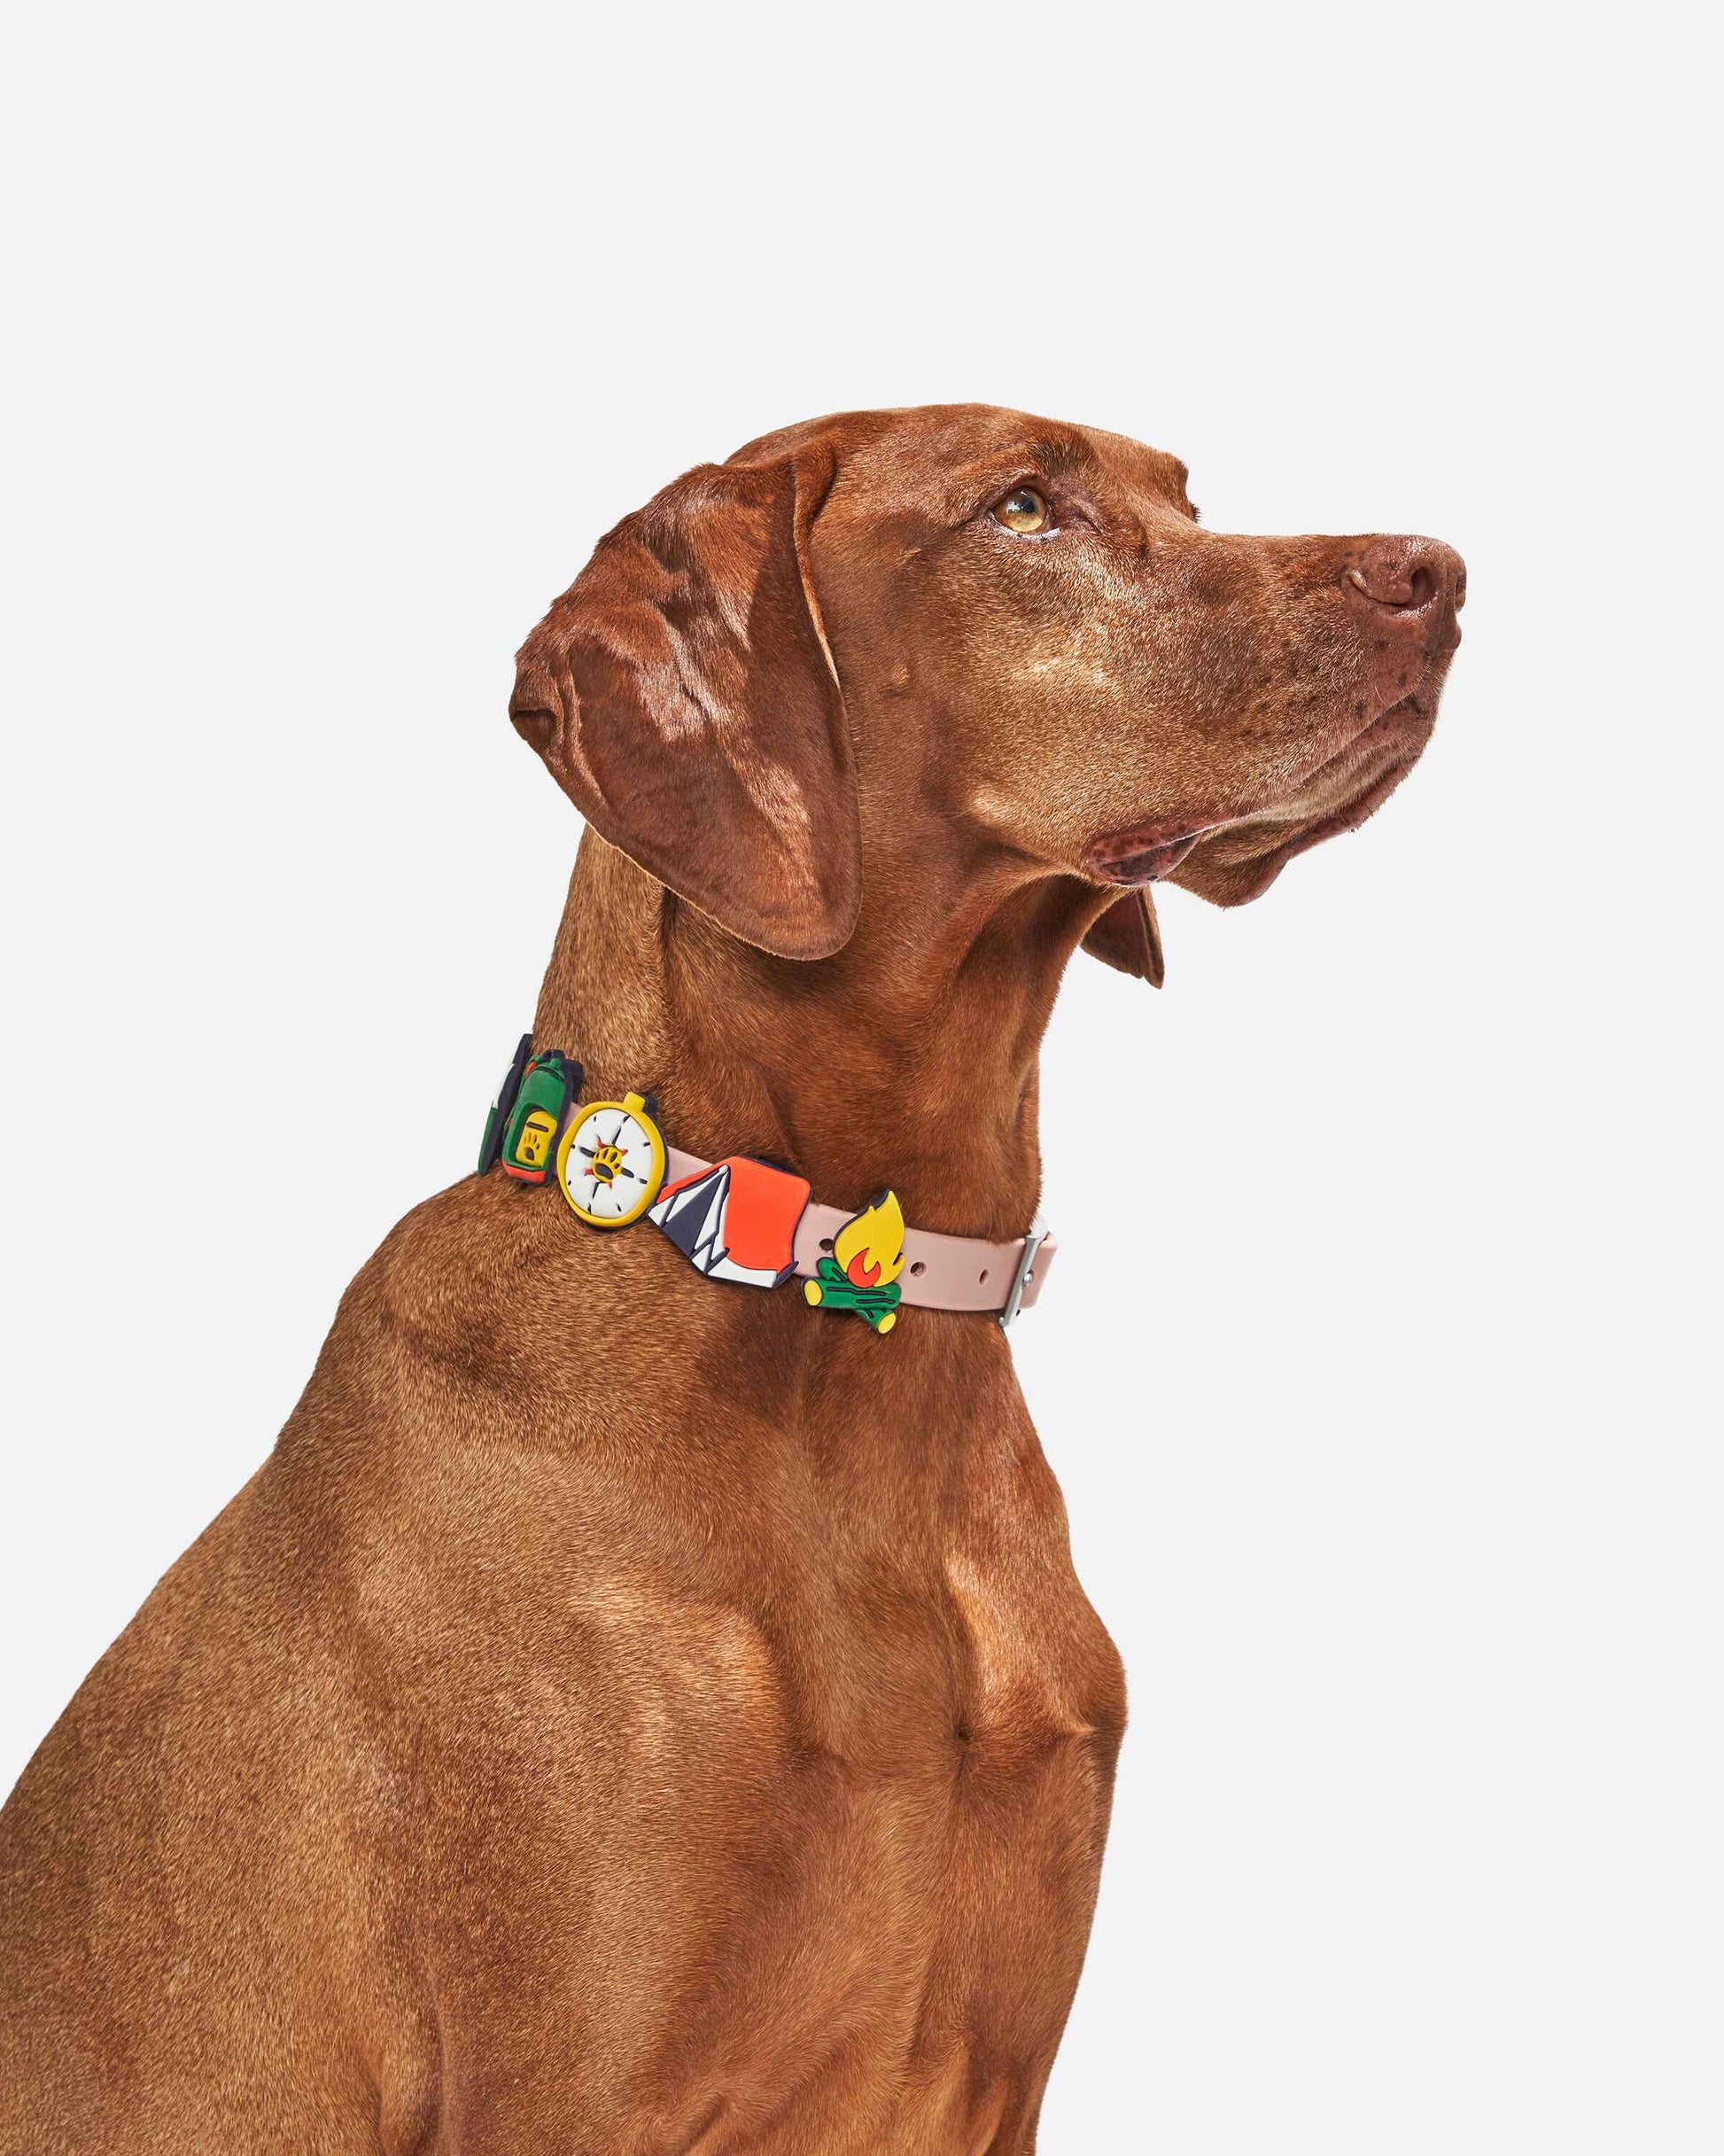 Camp | Pair With S-XL Collar, Standard Leash, and XS-S Harness